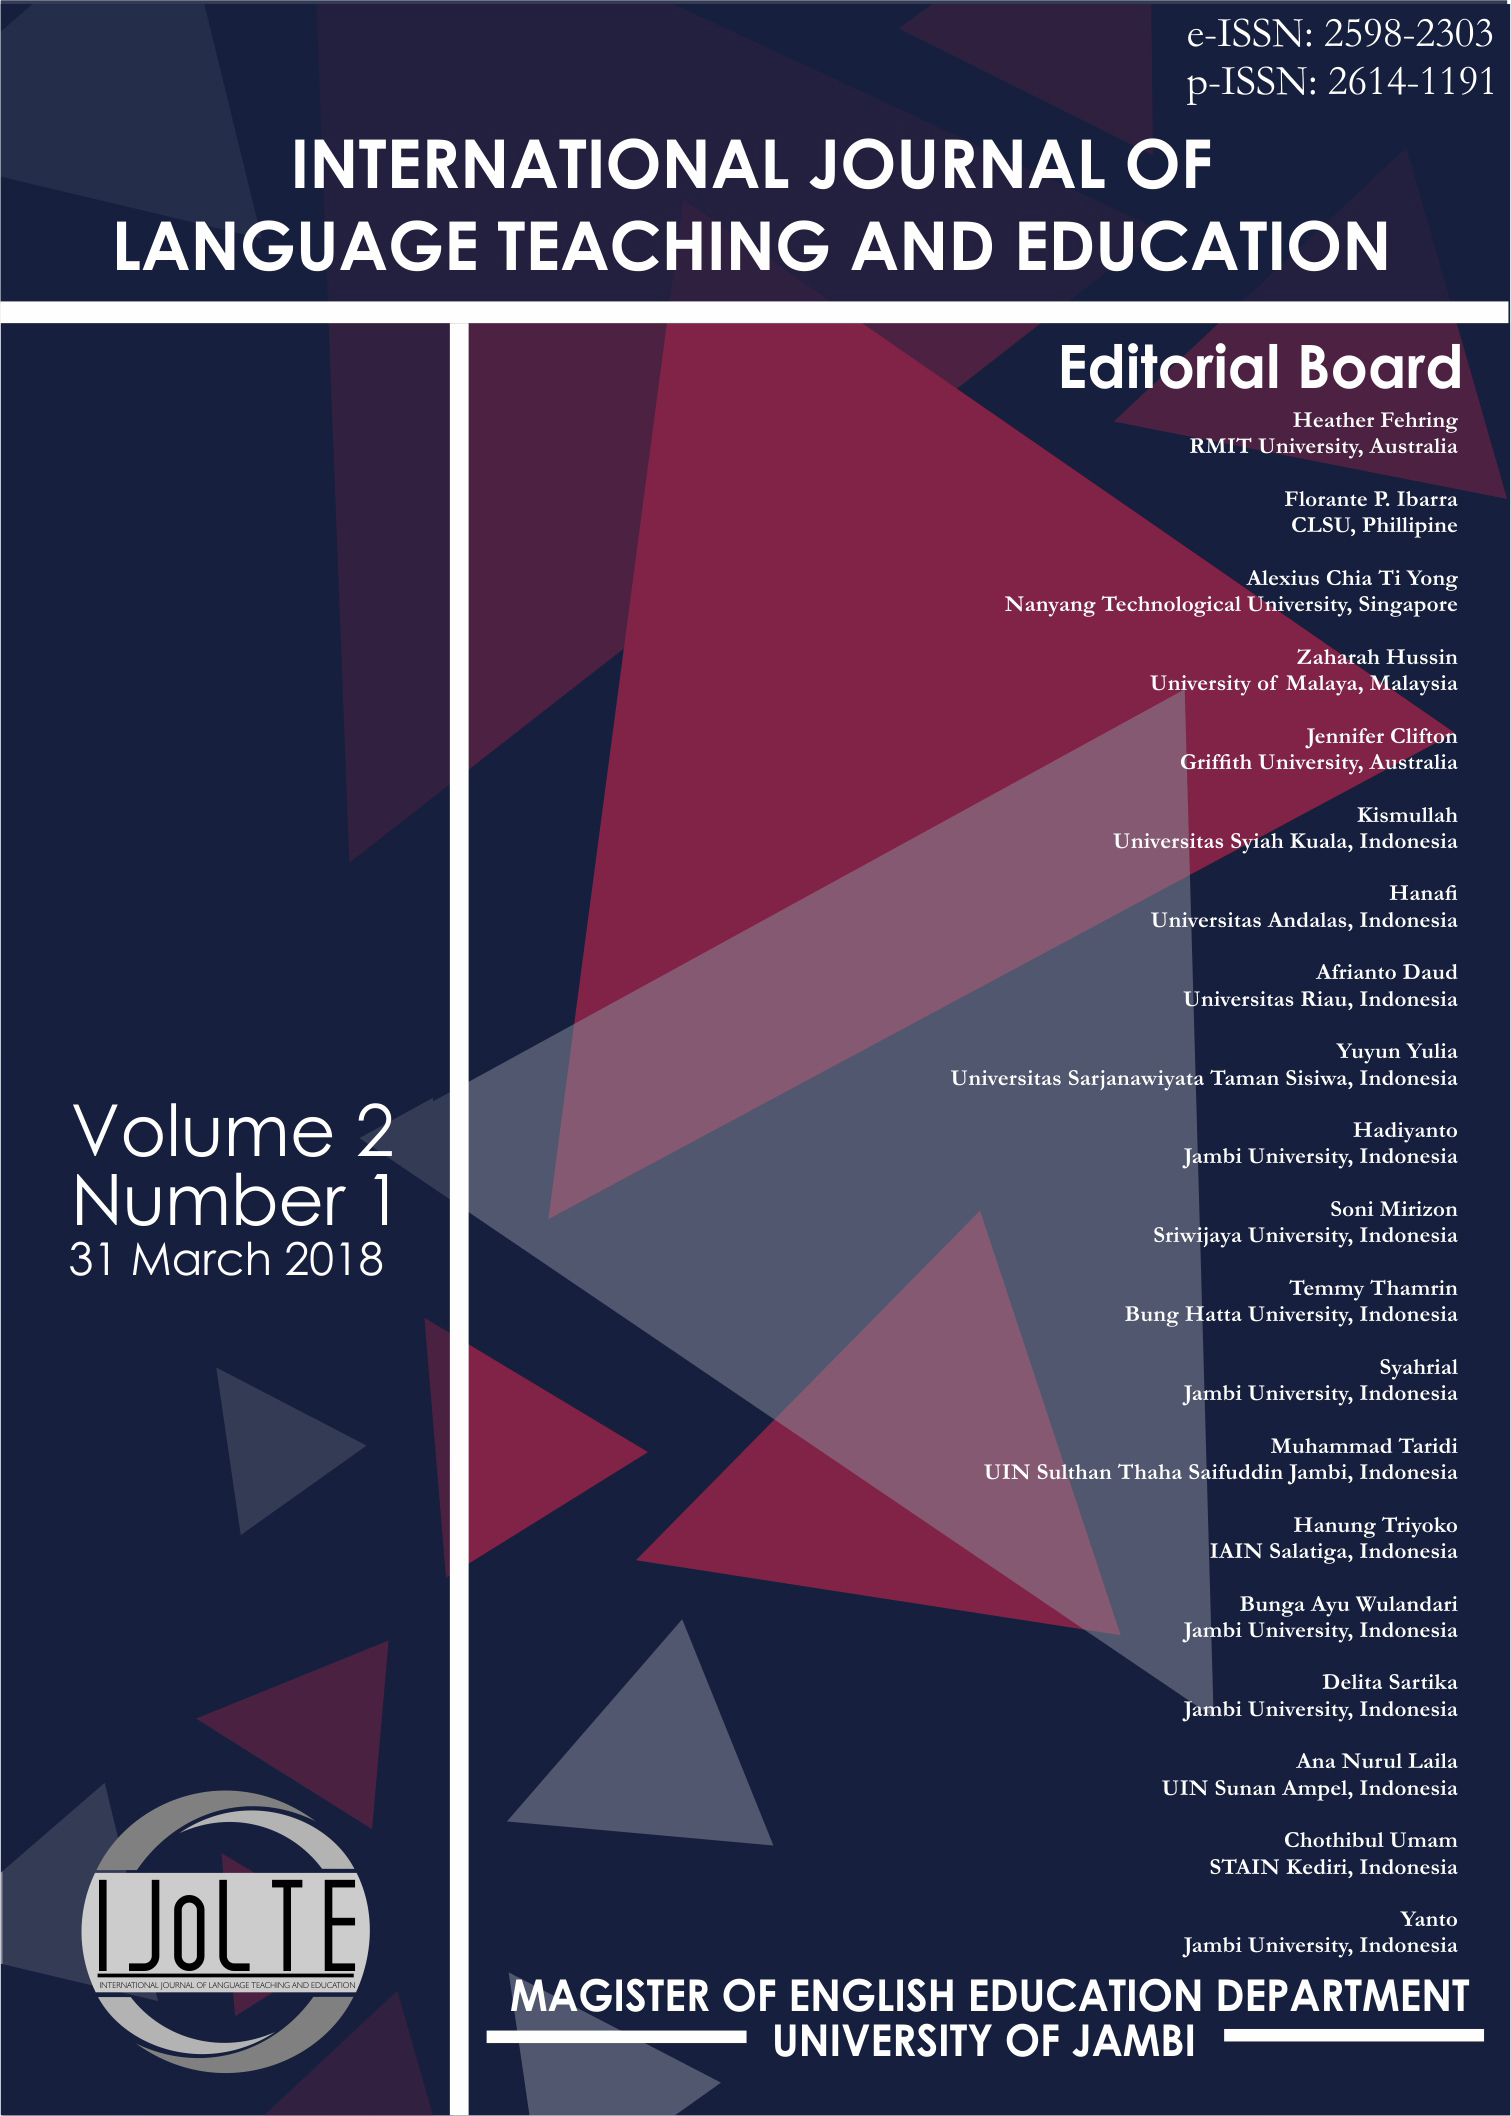 					View Vol. 2 No. 1 (2018): VOLUME 2, Number (Issue) 1, March 2018
				